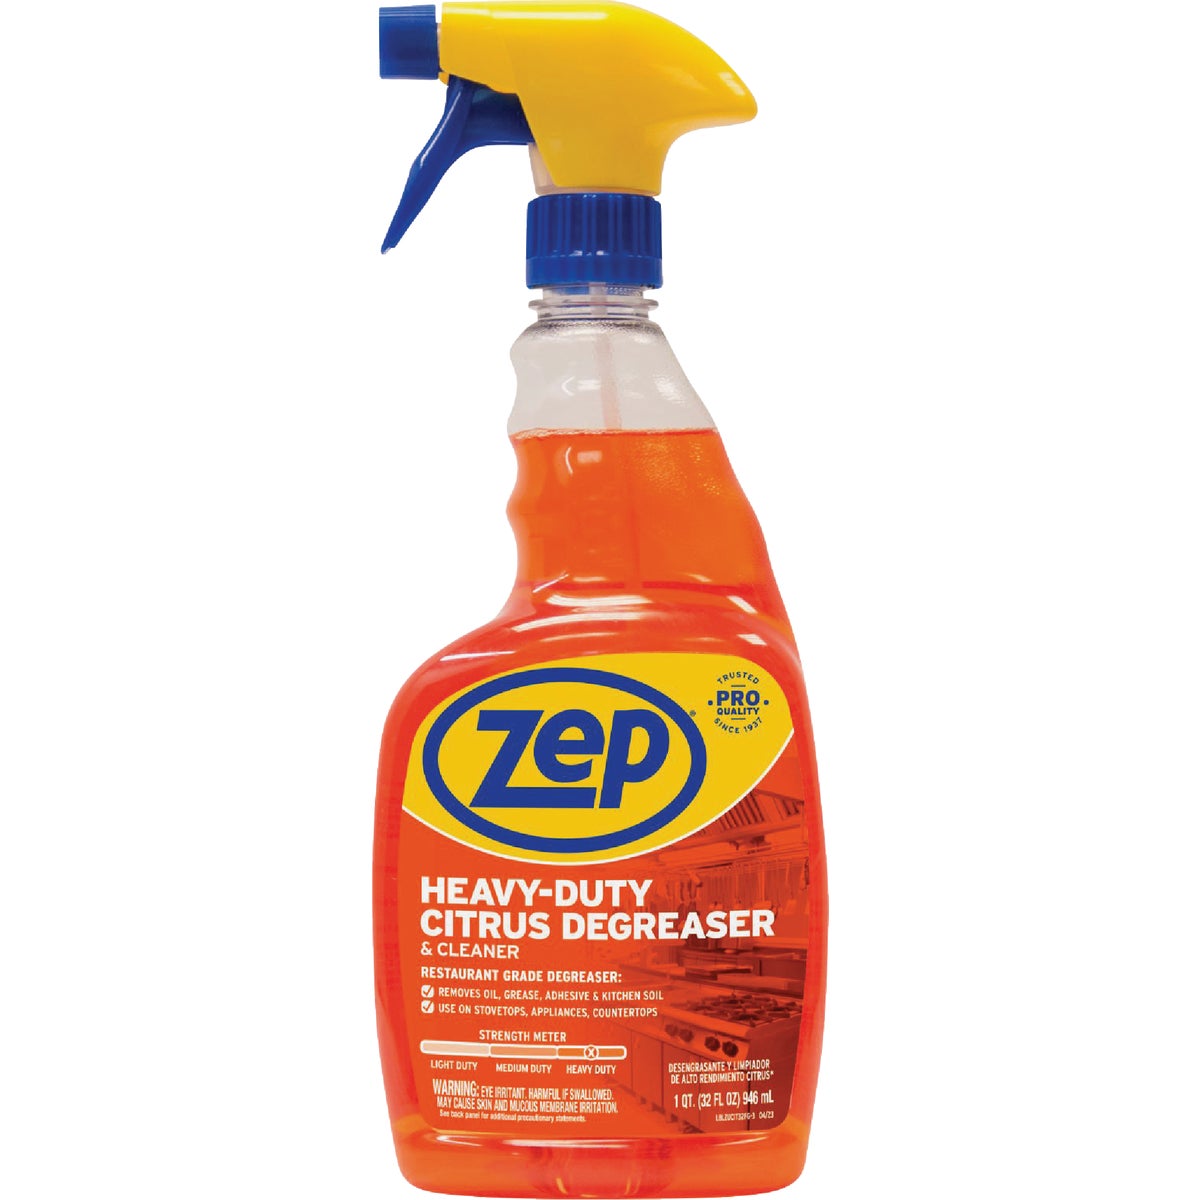 Item 618843, Zep heavy-duty citrus degreaser dissolves heavy grease and soils without 